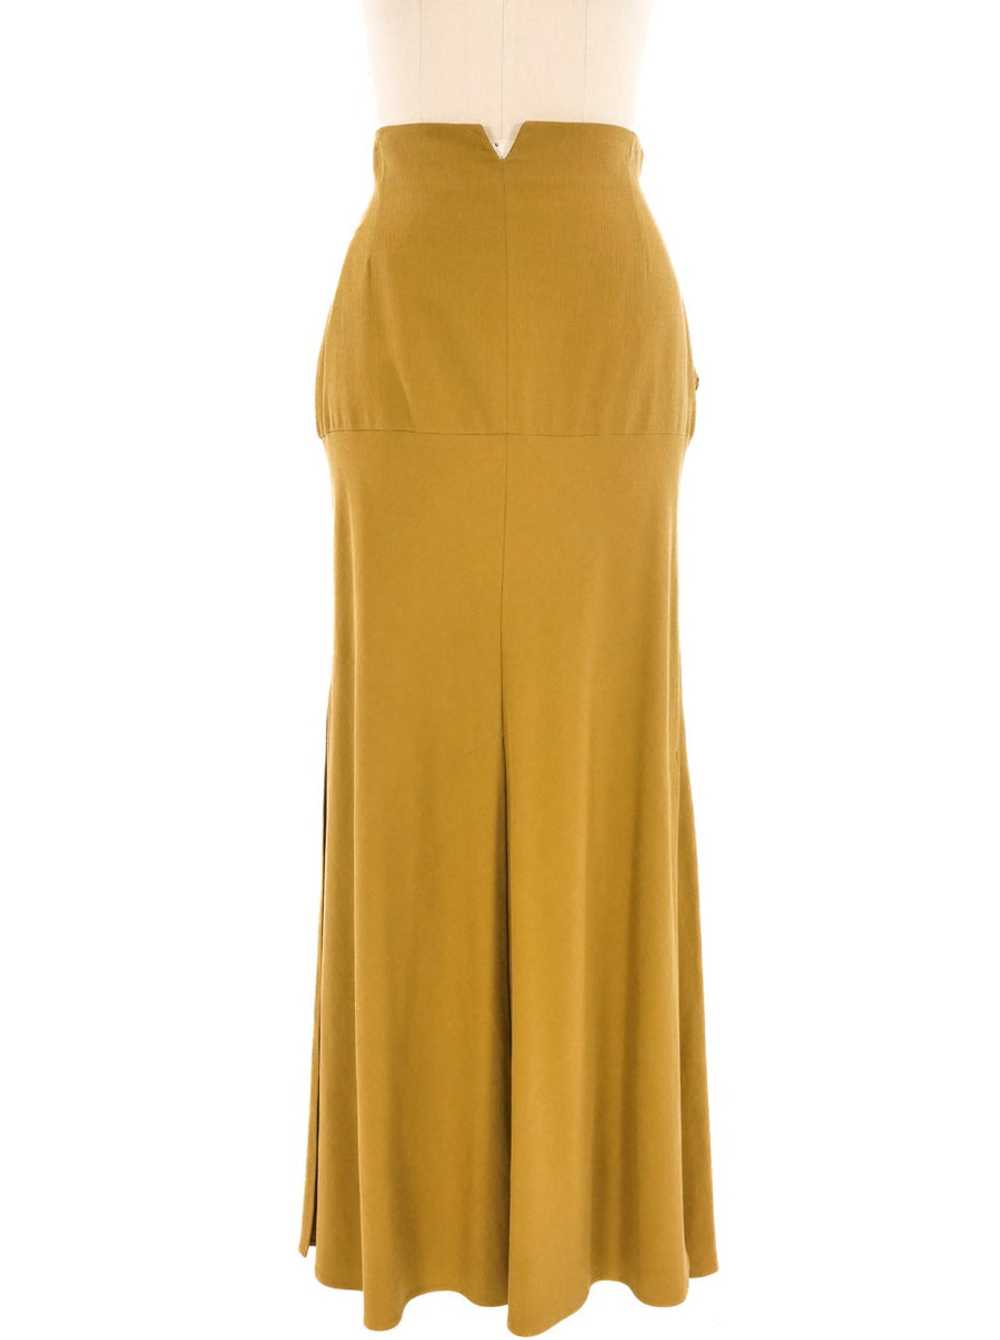 Romeo Gigli Suiting Inspired Maxi Skirt - image 1